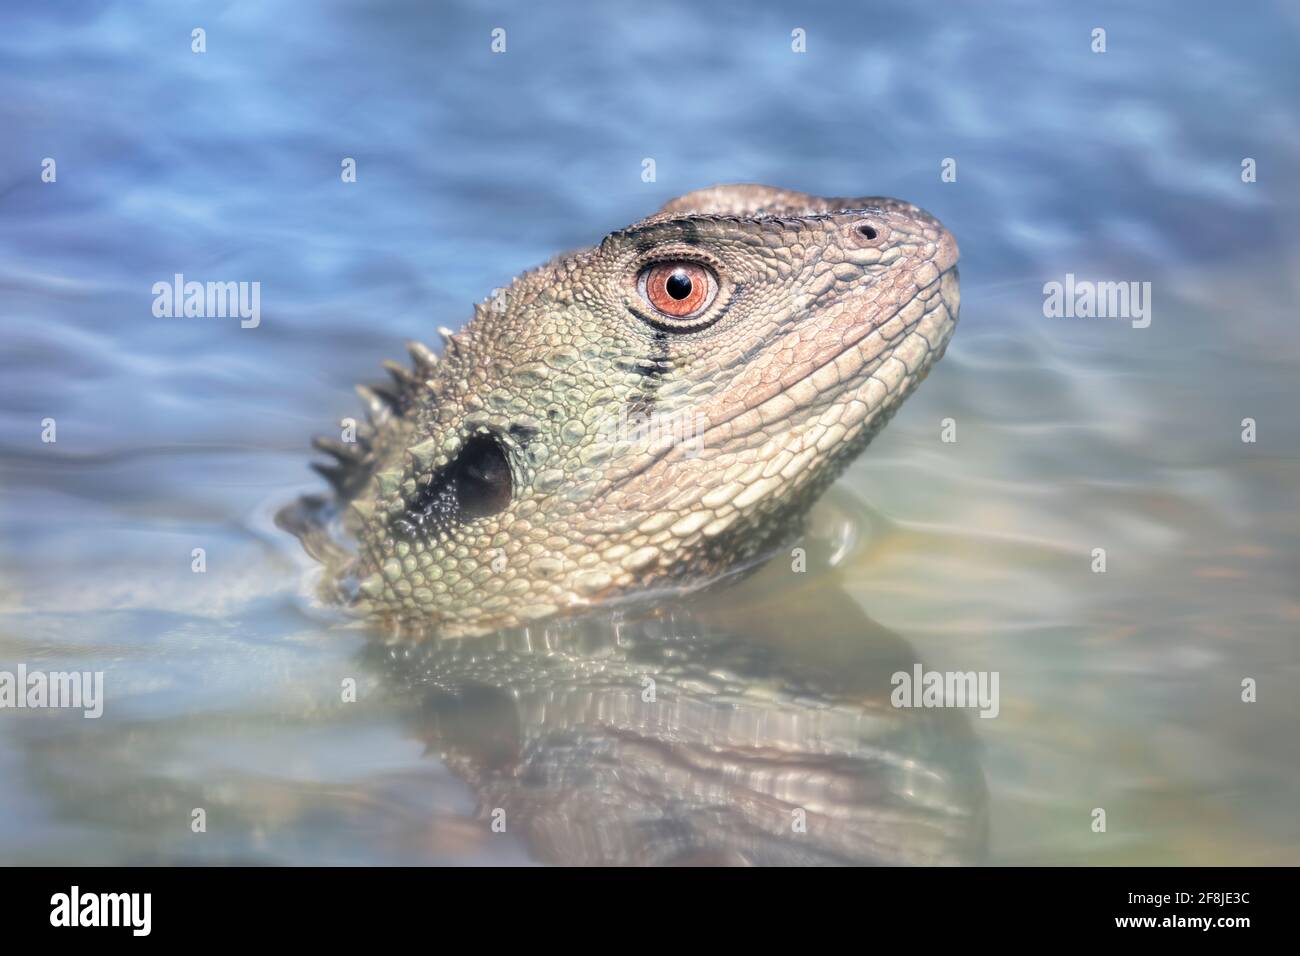 Portrait of a wild Gippsland Water Dragon partially submerged in a river, Australia Stock Photo